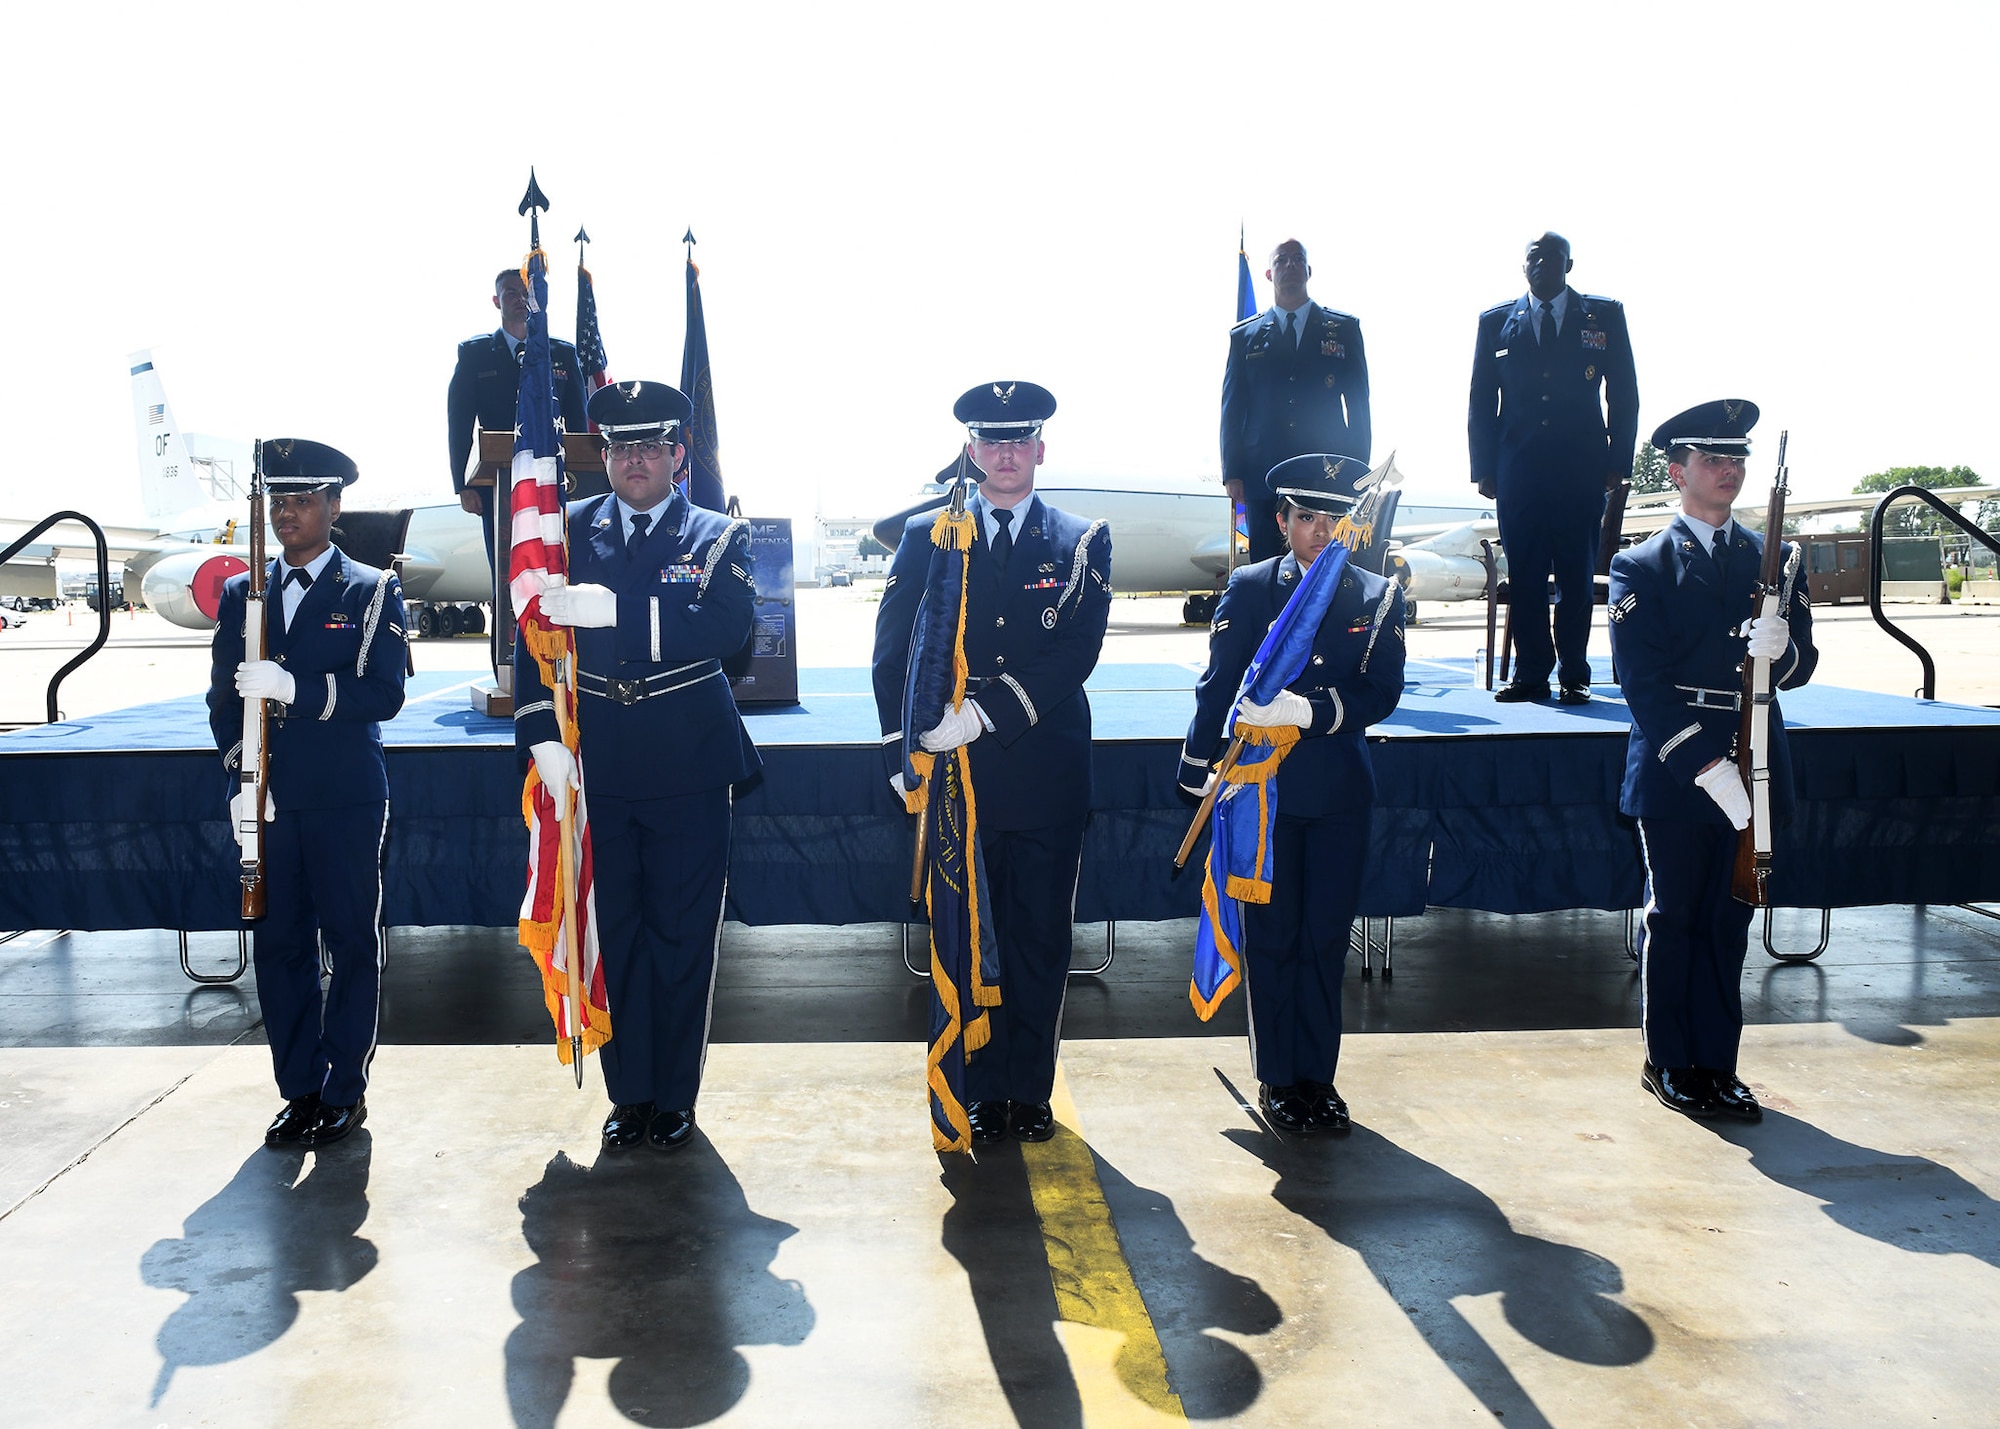 Air Force Airmen carry flags during a ceremony